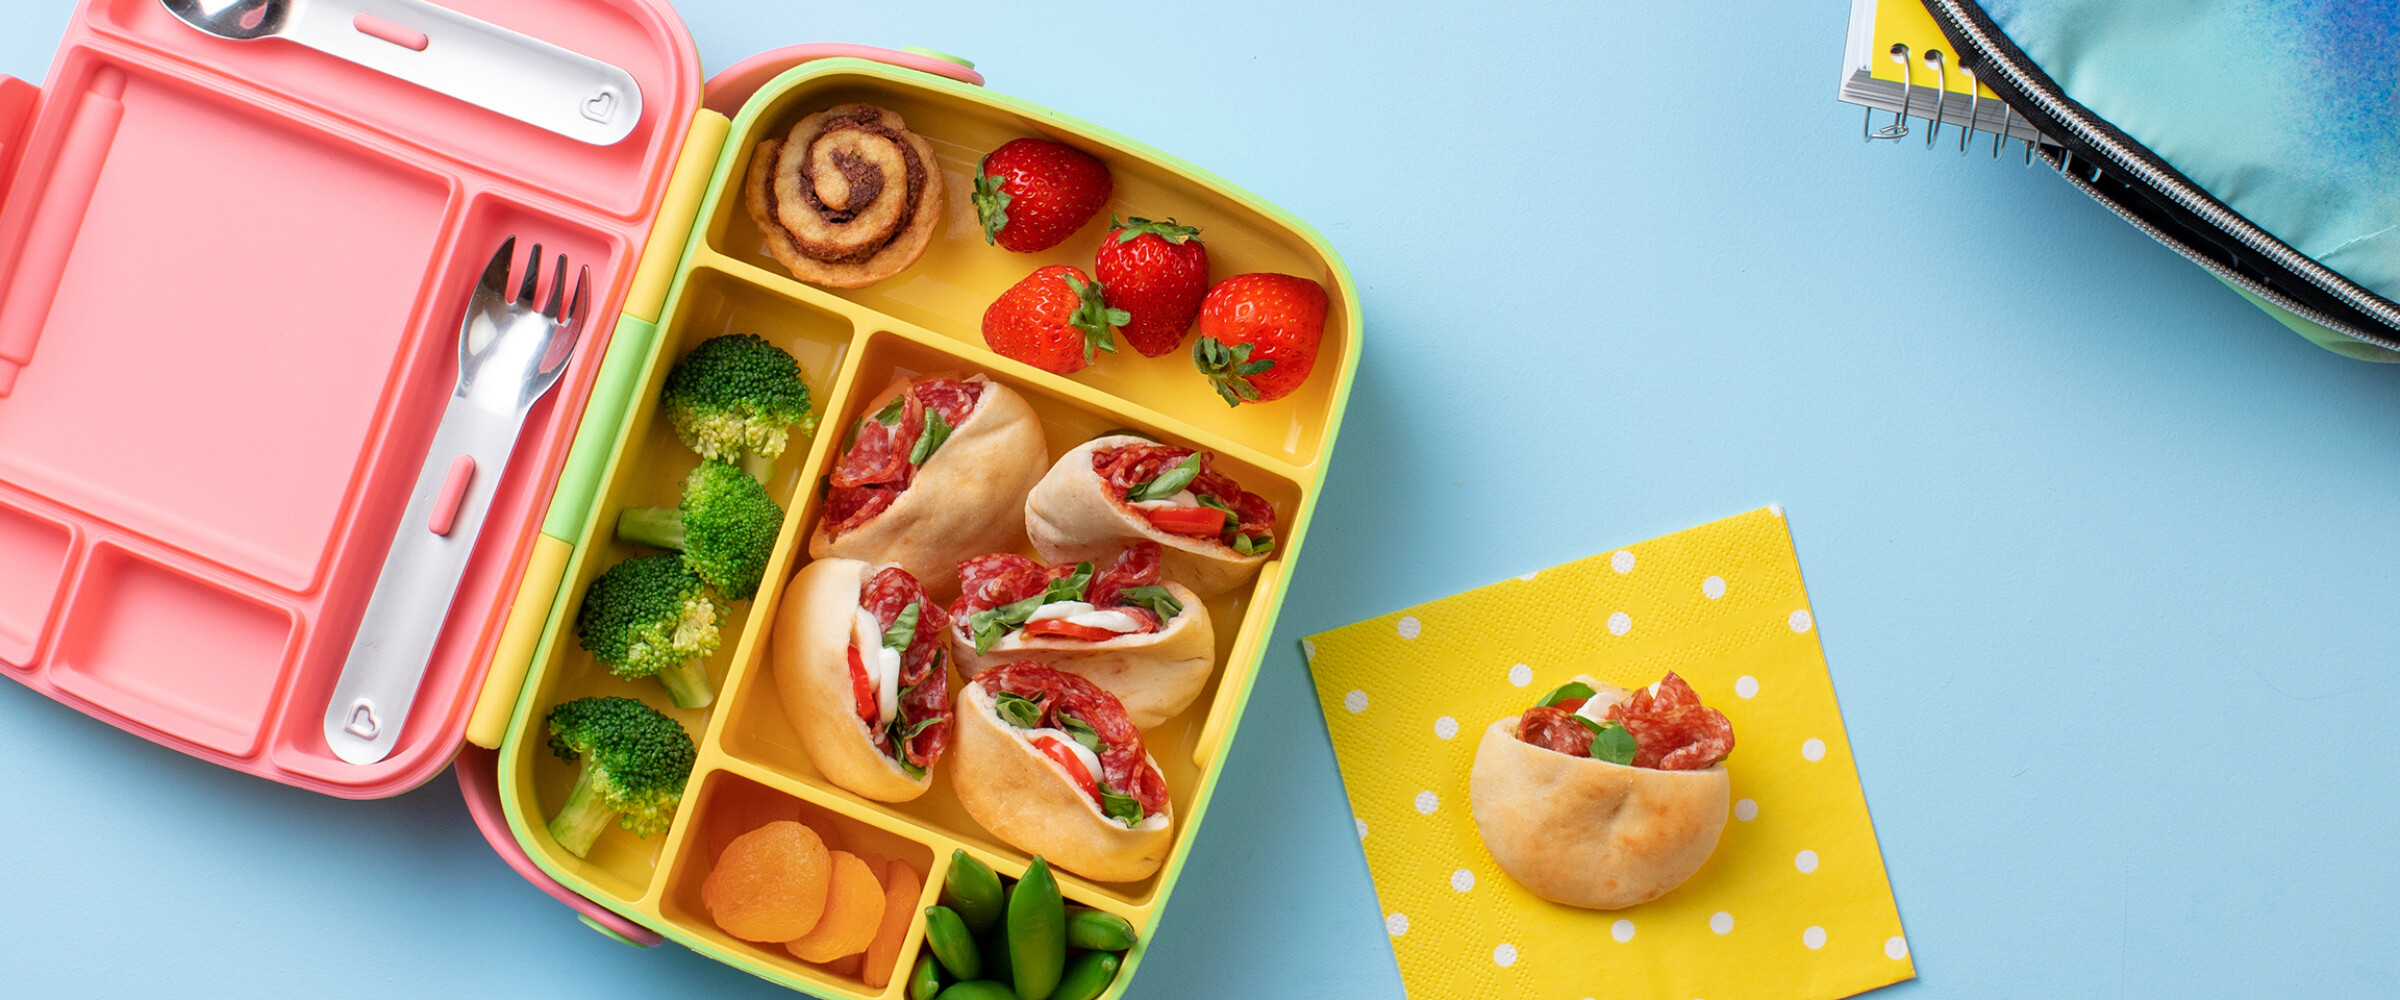 lunch box with pita pizzas with salami, fruits, veggies.